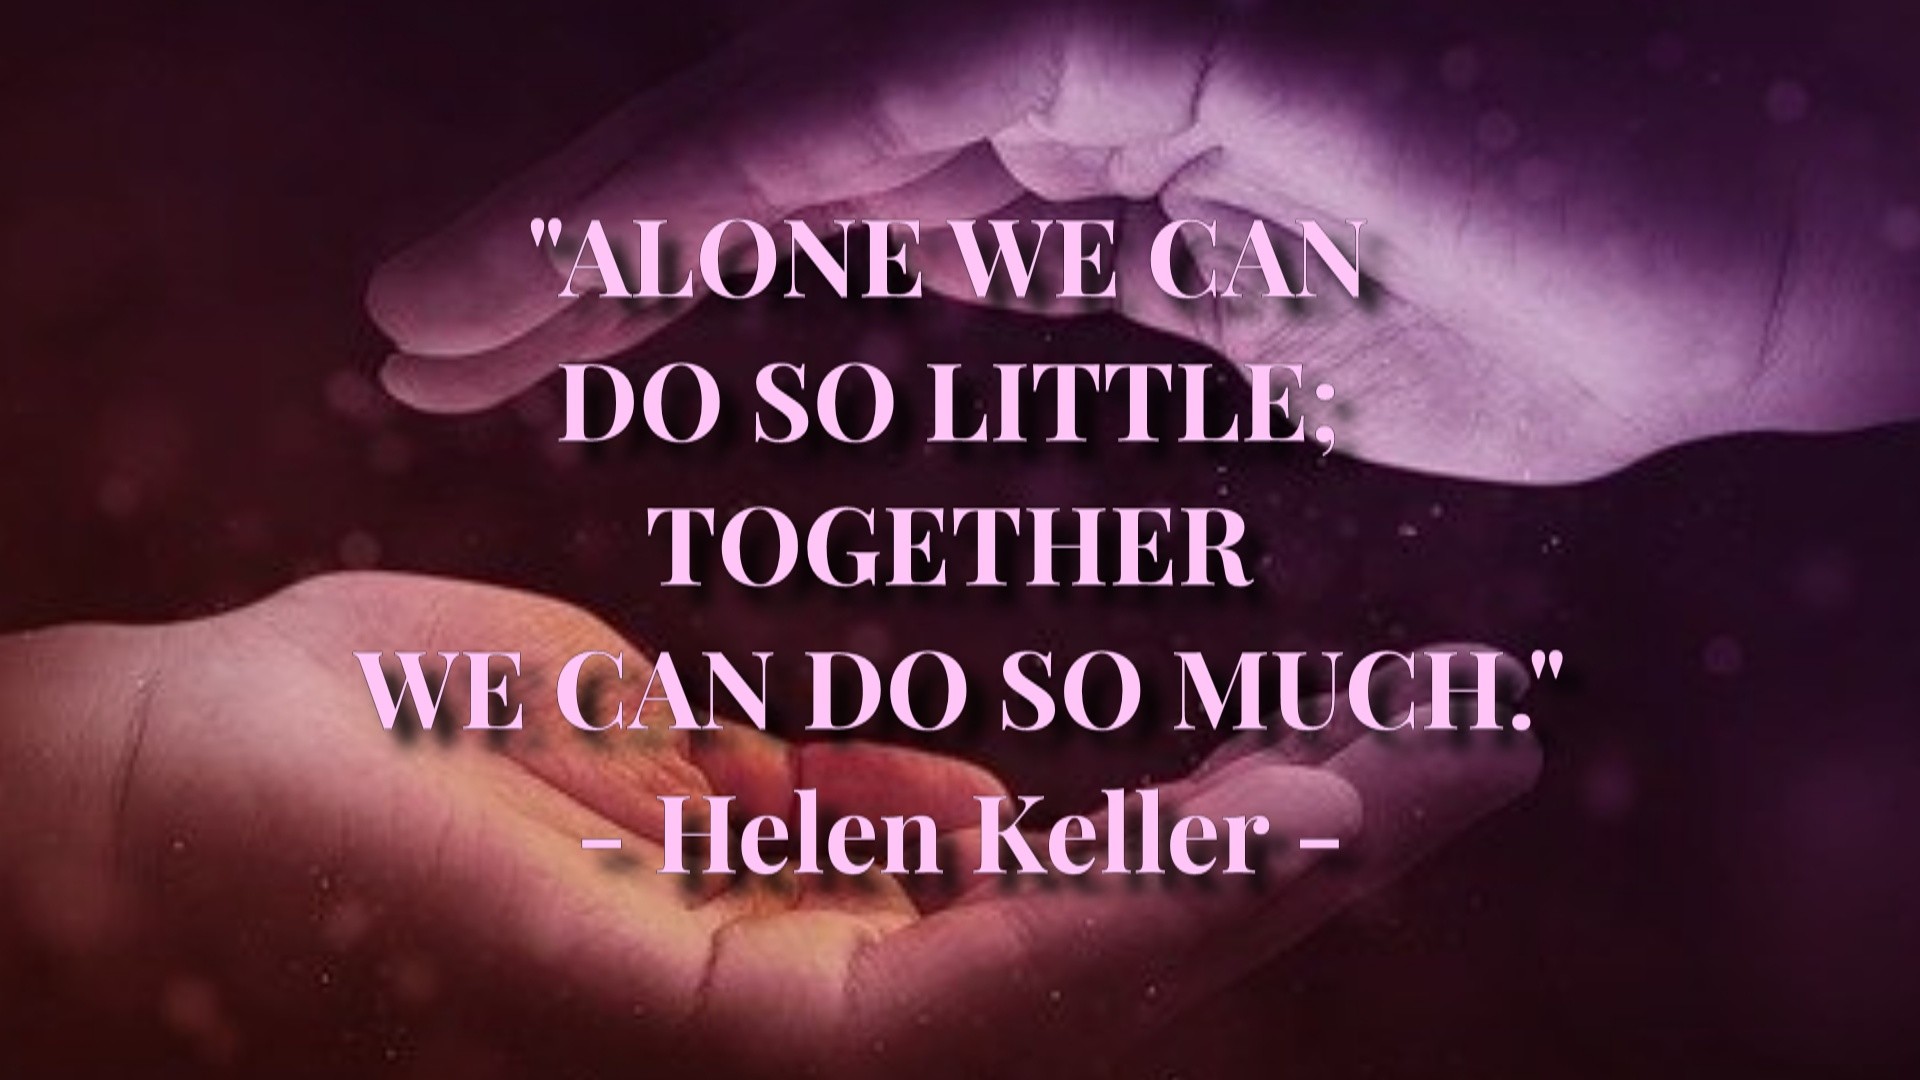 Alone we can do so little Together we can do so much - Helen Keller